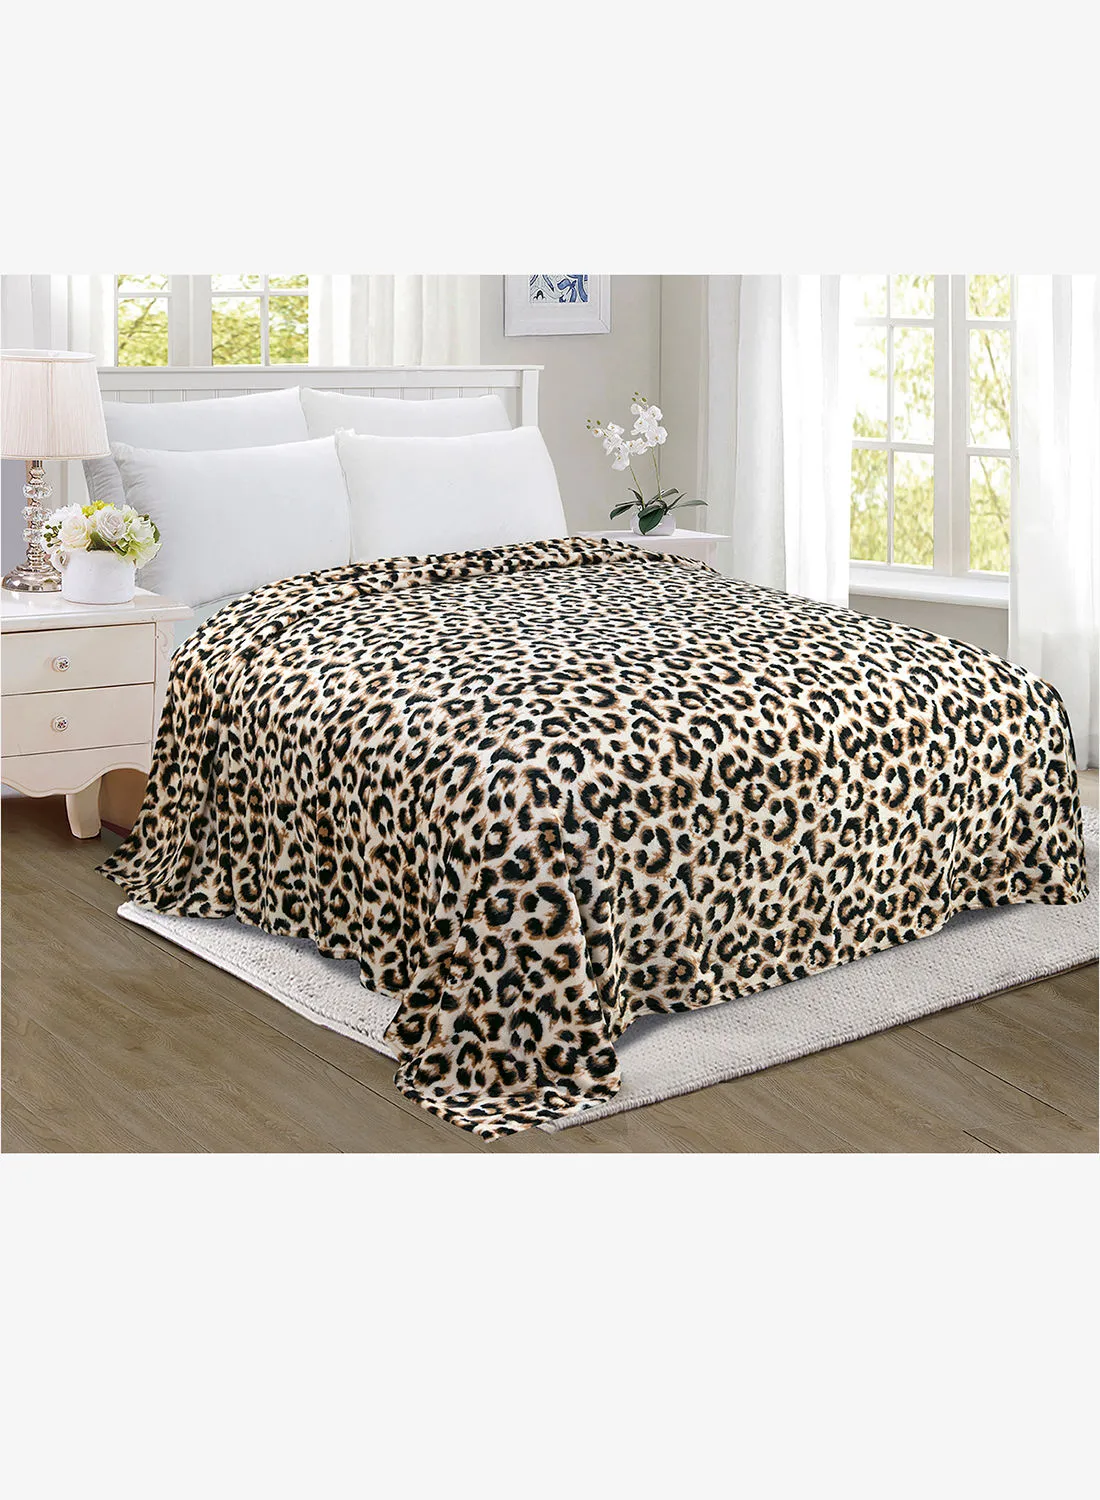 noon east Rotary Fleece Blanket Dotted Printed Queen